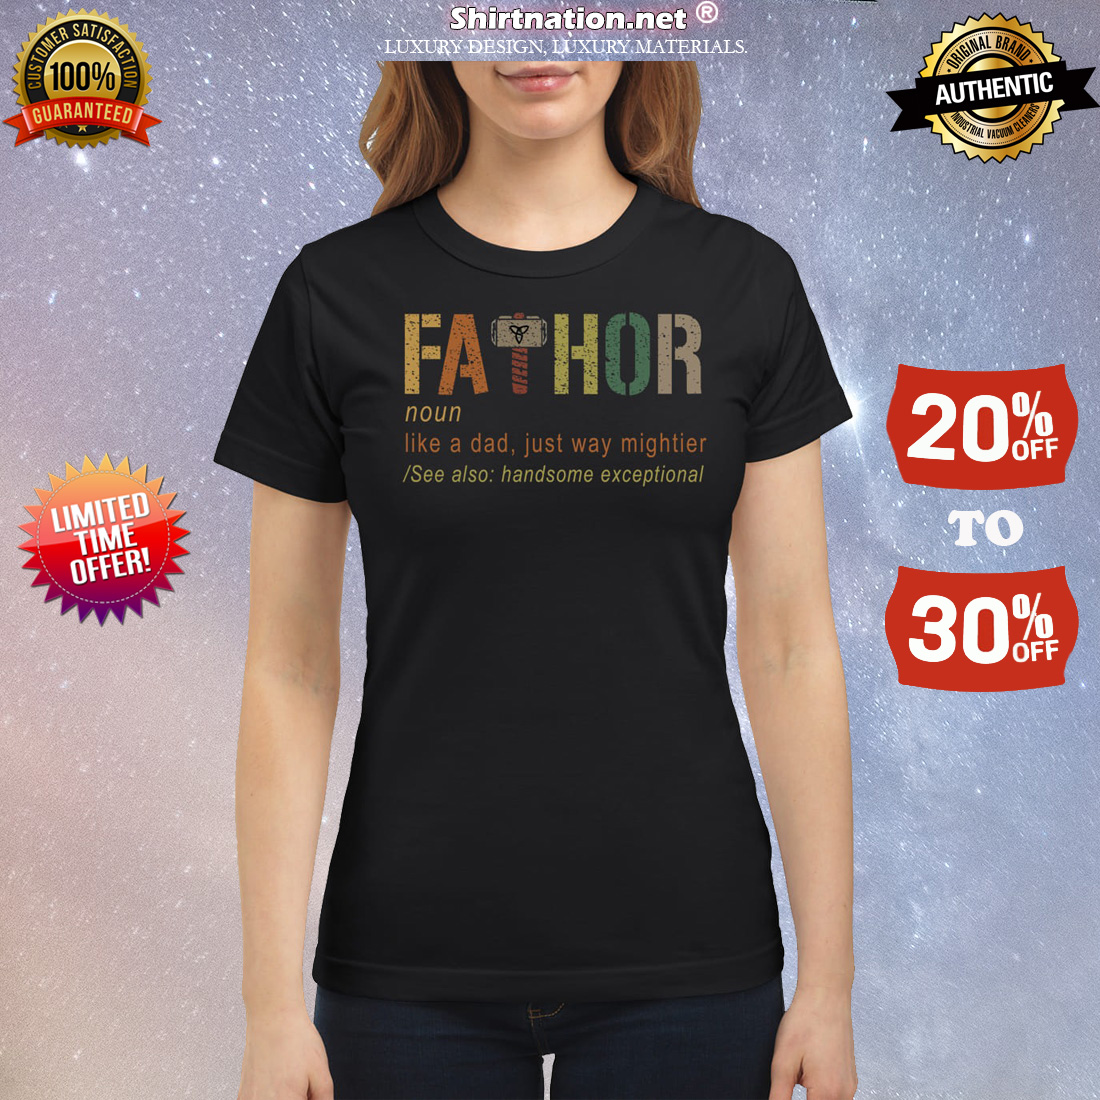 Fathor like a dad just way mightier classic shirt